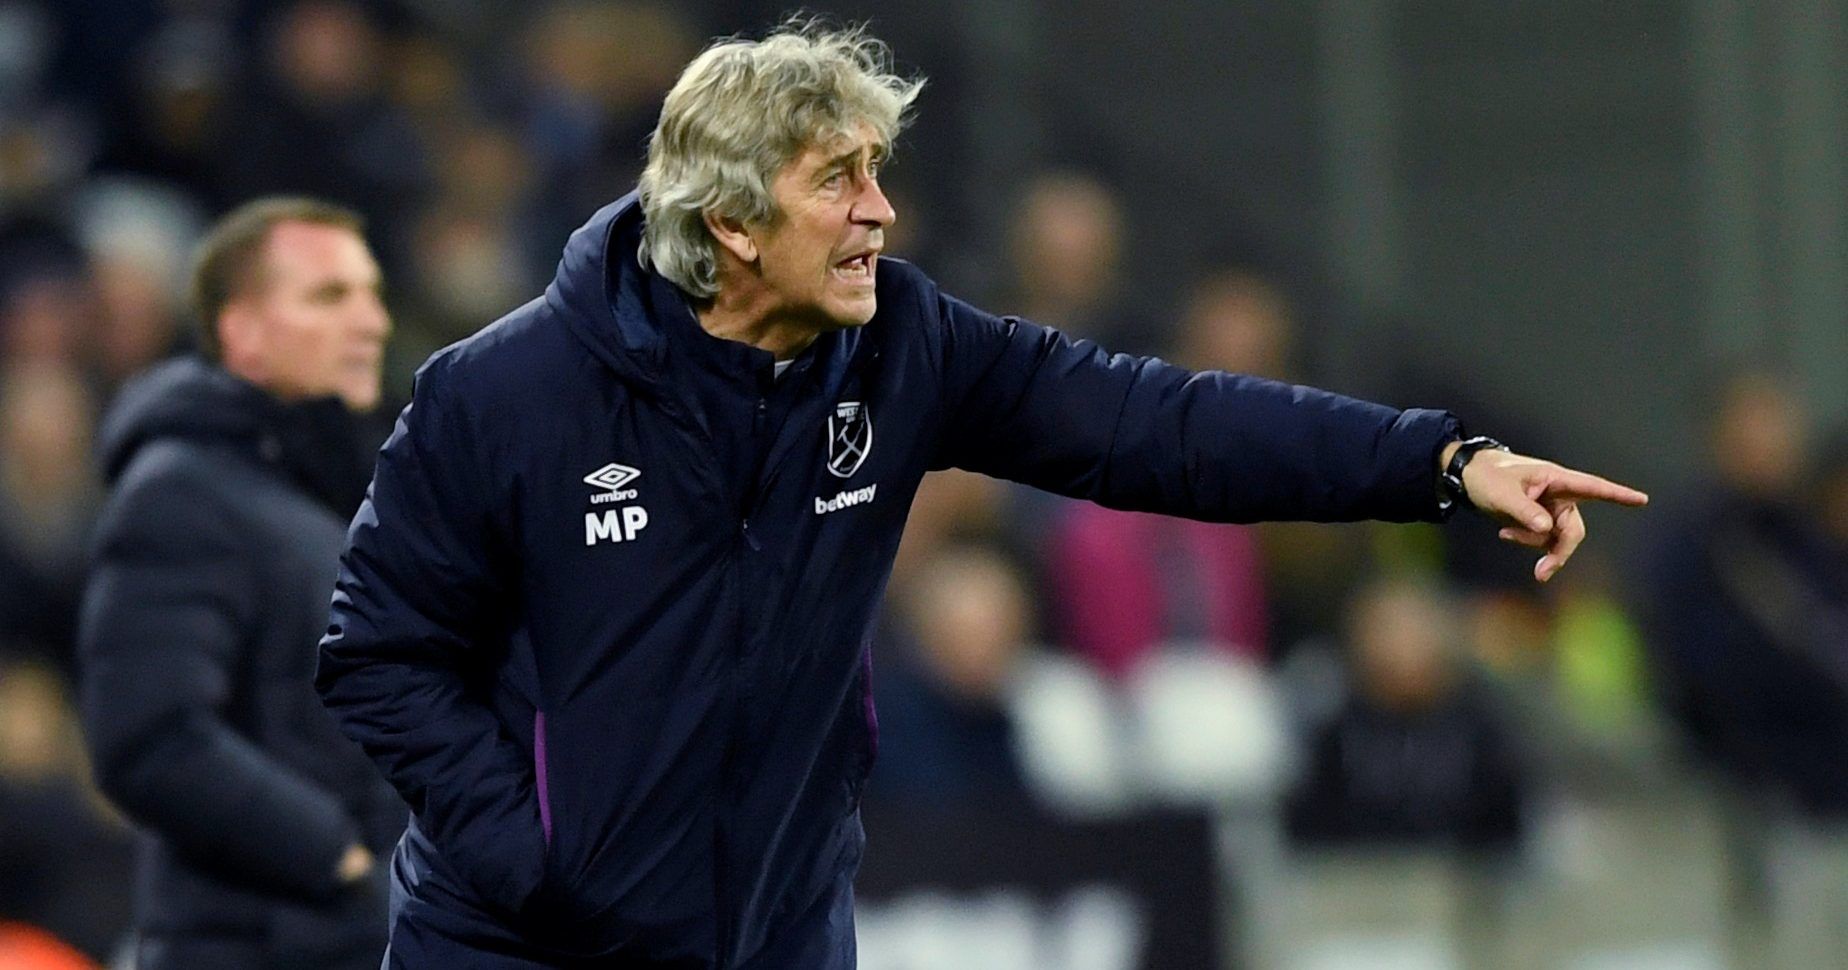 Soccer Football - Premier League - West Ham United v Leicester City - London Stadium, London, Britain - December 28, 2019  West Ham United manager Manuel Pellegrini reacts    Action Images via Reuters/Tony O'Brien  EDITORIAL USE ONLY. No use with unauthorized audio, video, data, fixture lists, club/league logos or 